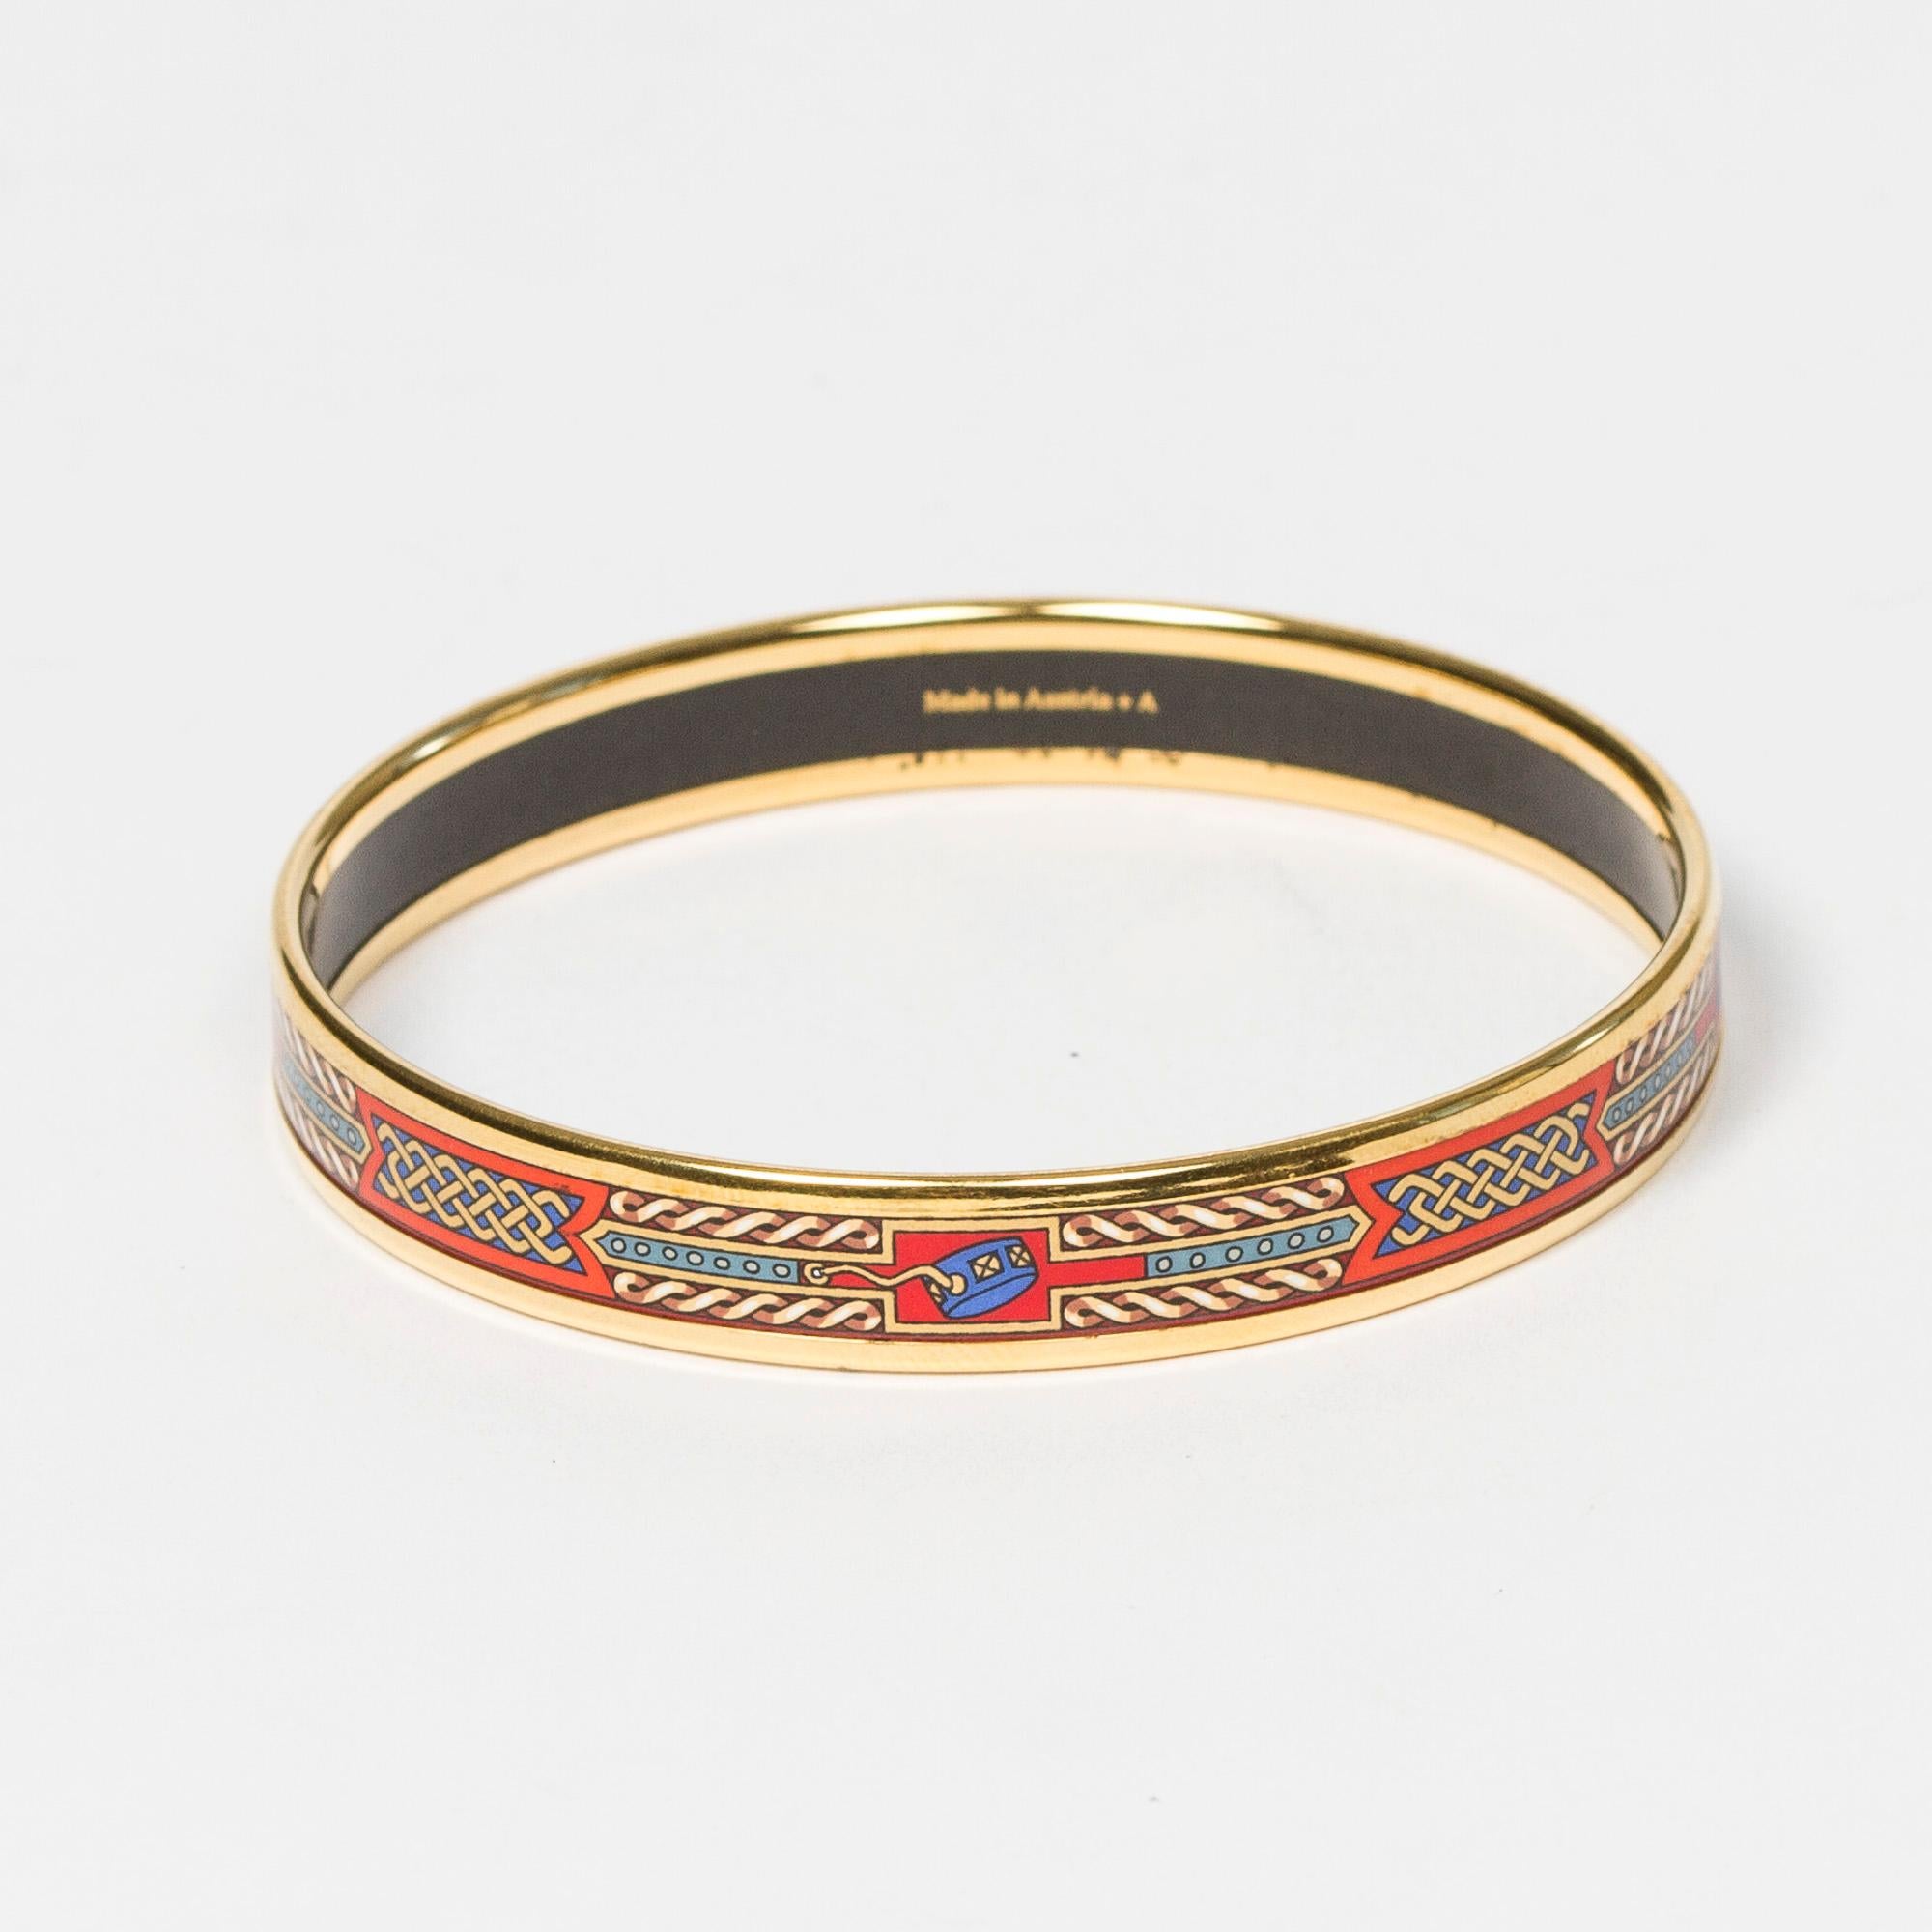 Costume Jewelry Enamel Bangle Hermes in Gold/Red/White The Production code is  and the product comes with a box. This product is rated condition : AB which means Gently Used : Regular wear signs, beautiful patina. May present scuffs or stains inside